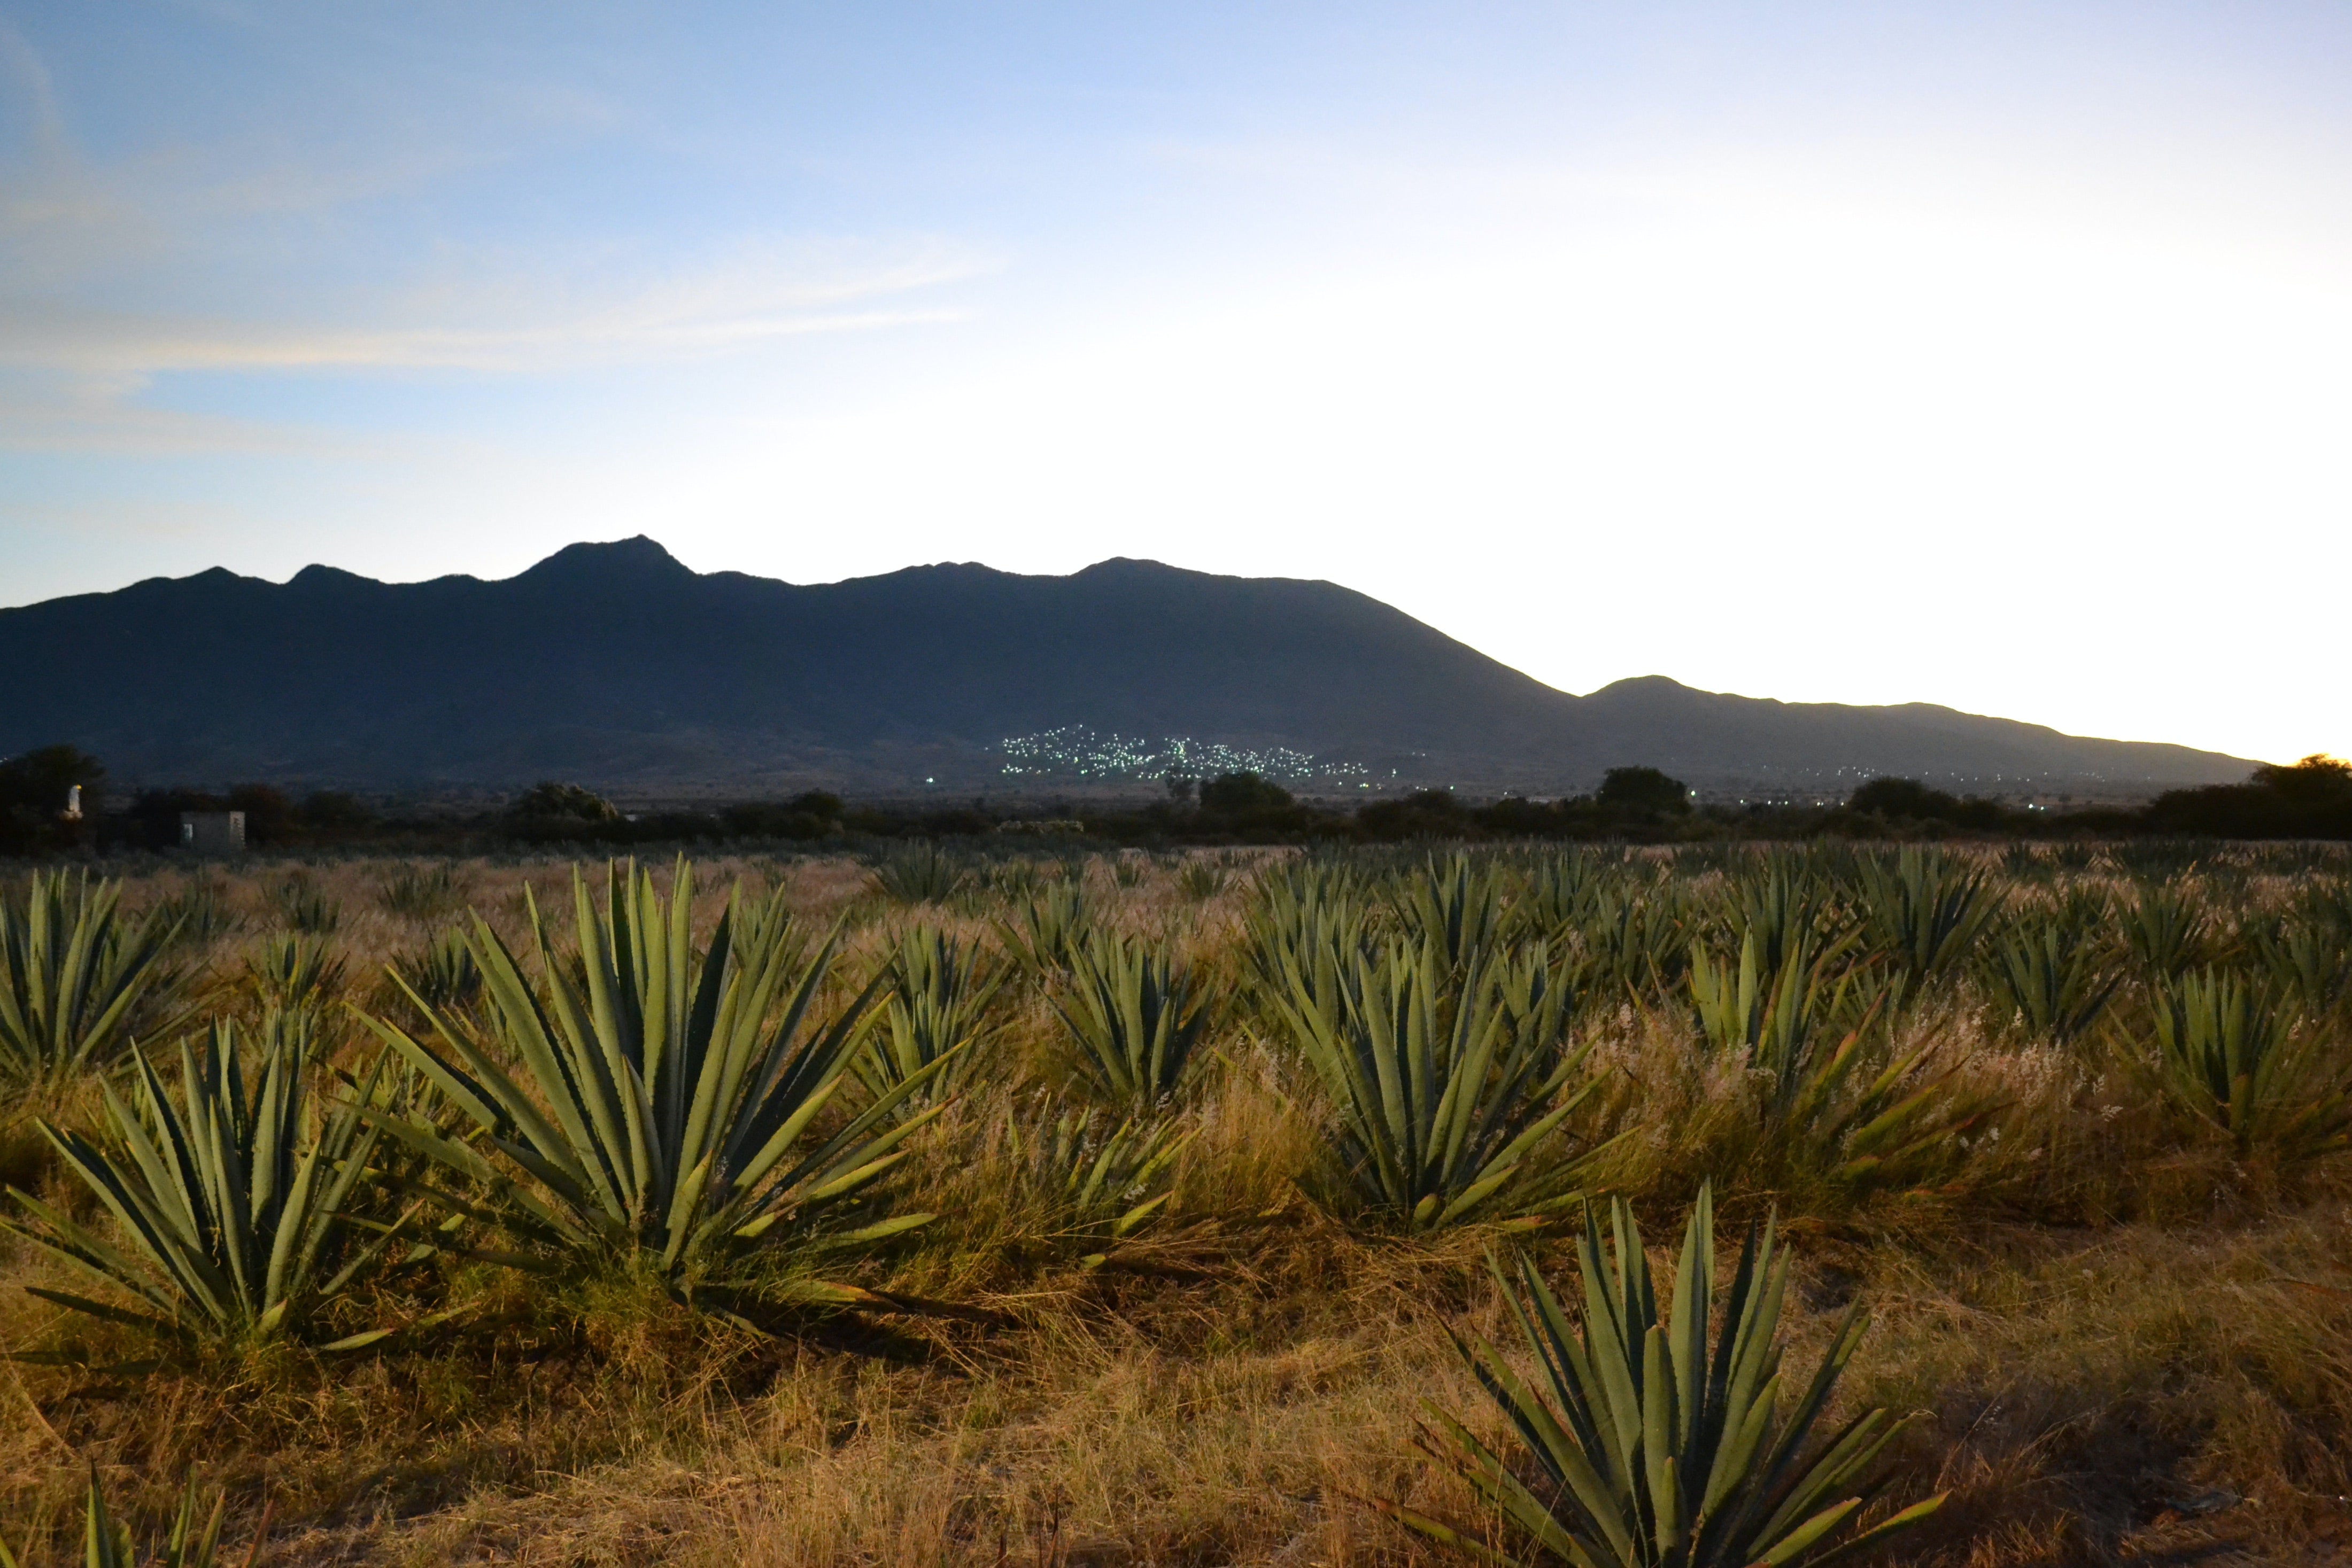 Agave plants grow in the fields of Jalisco, Mexico at dusk, with mountain ranges in the background.